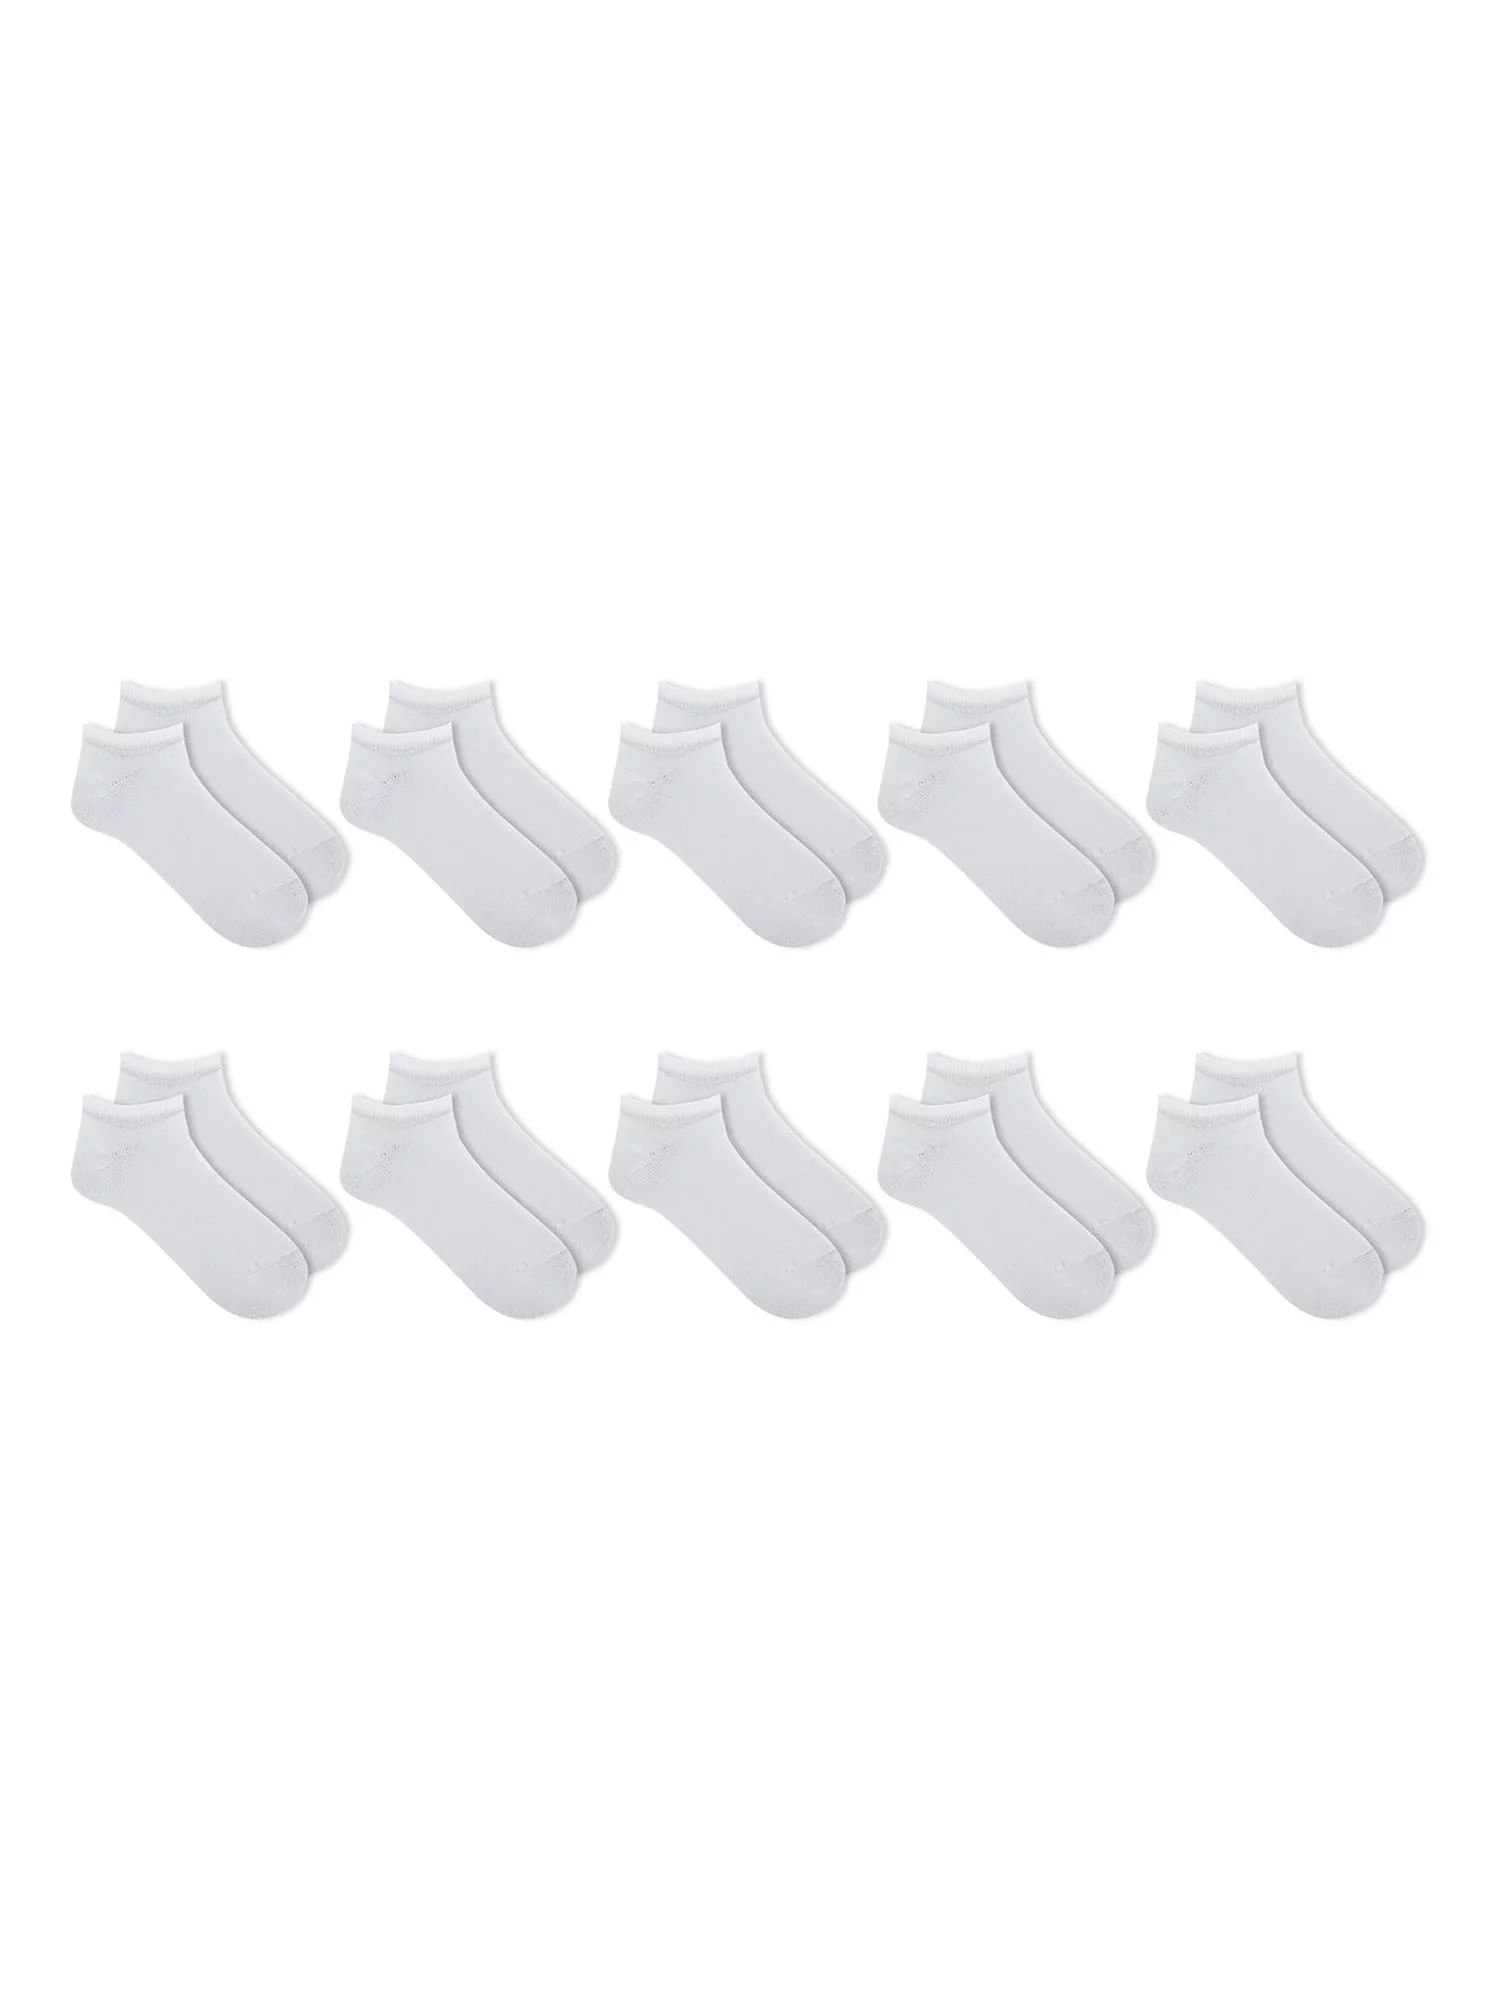 Athletic Works Women's Cushioned No Show Socks 10 Pack | Walmart (US)